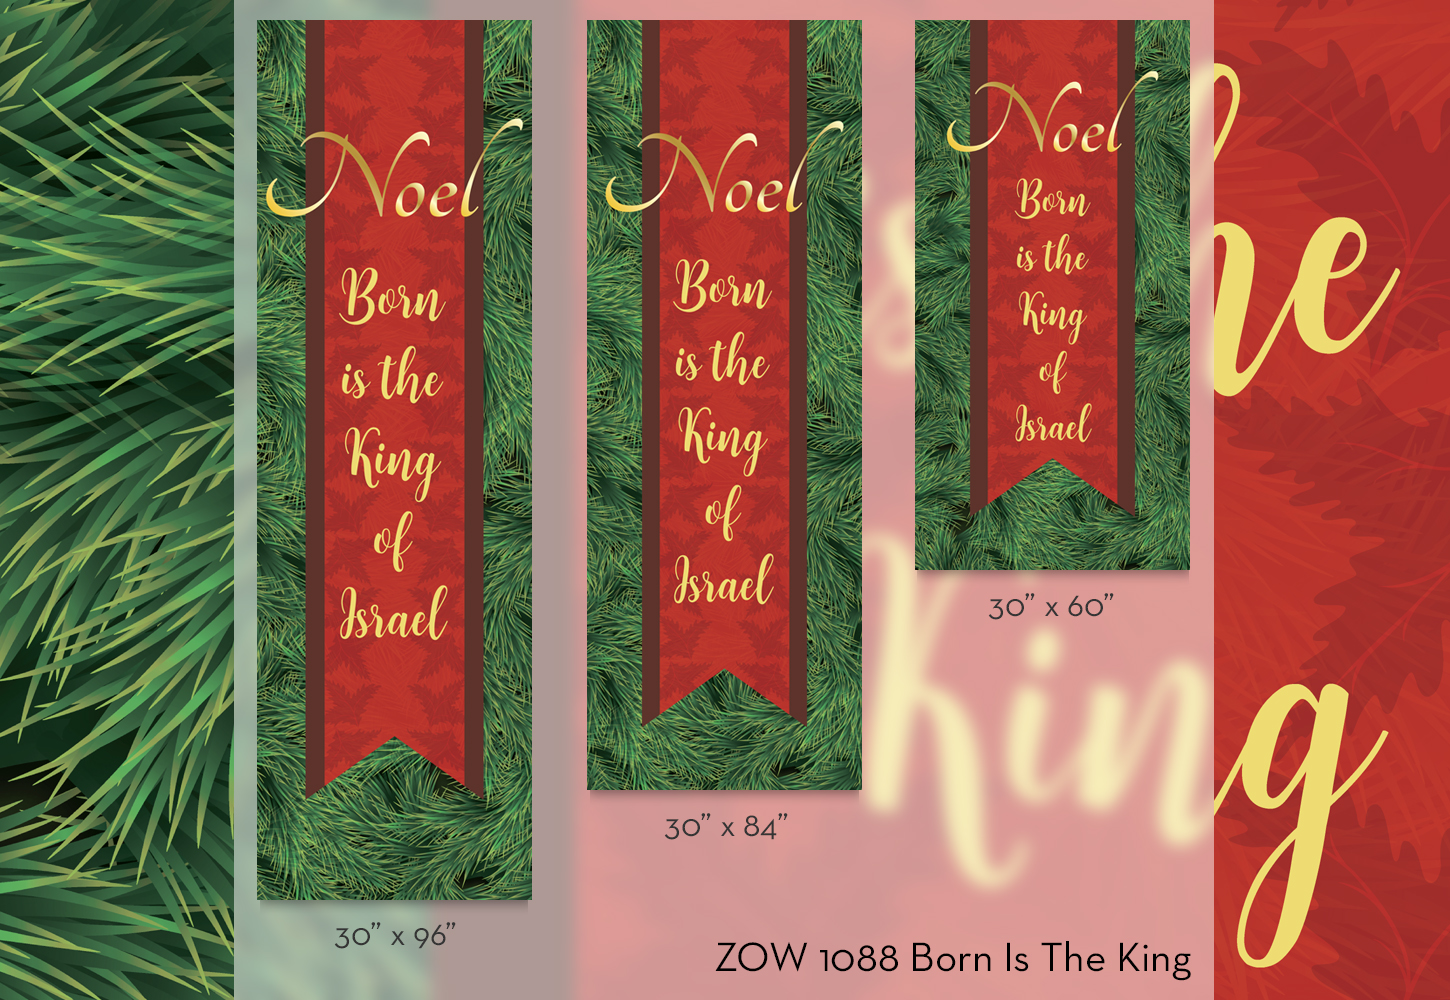 ZOW 1088 Born Is The King